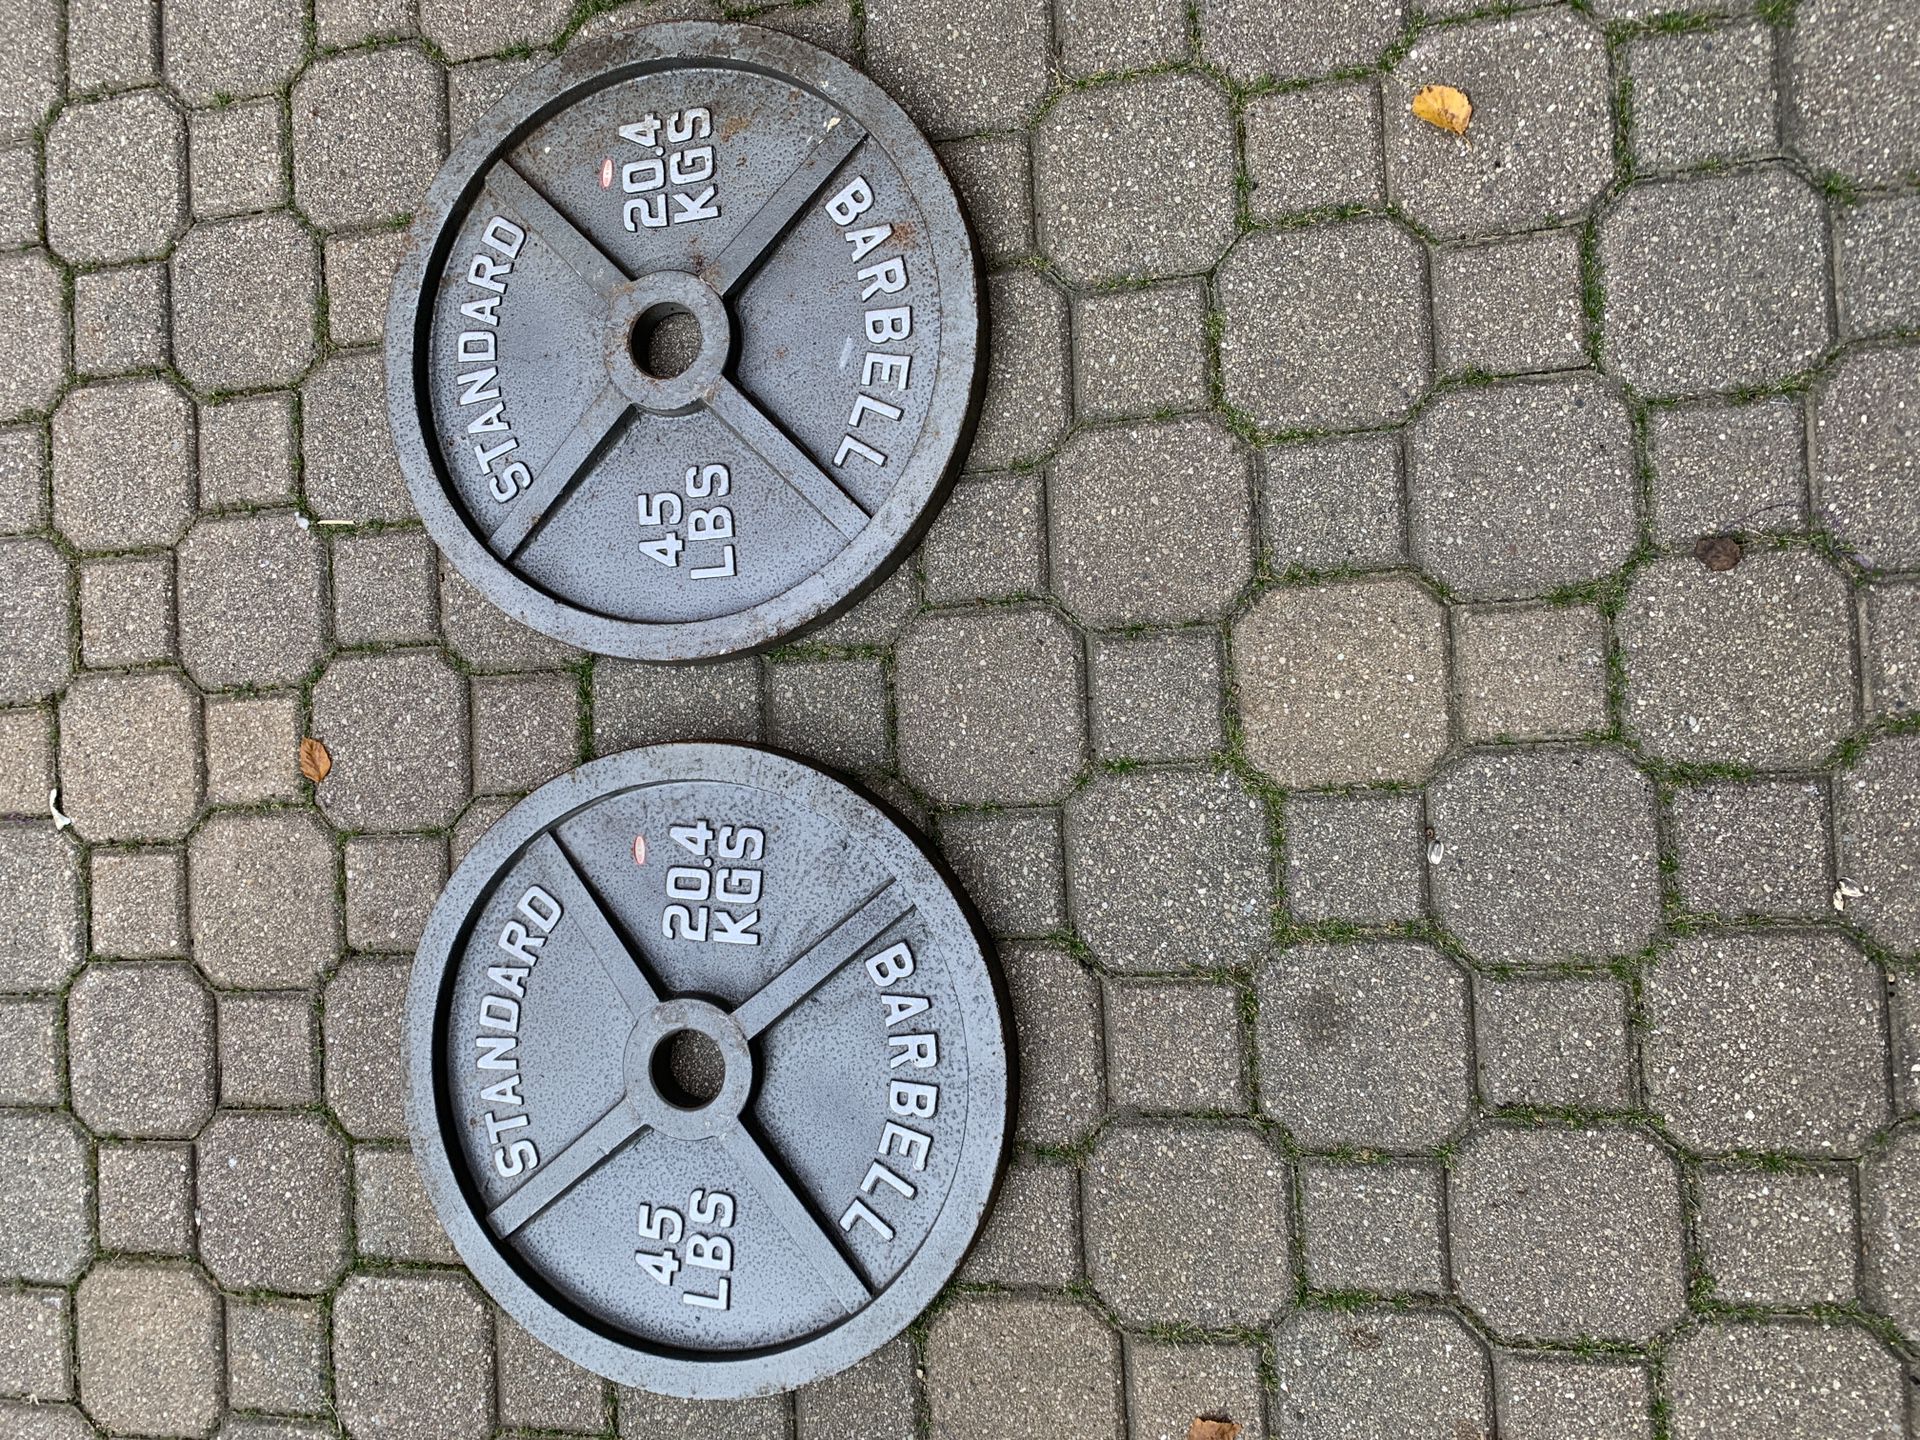 1 pair 45lb weight plates - 90 lbs total